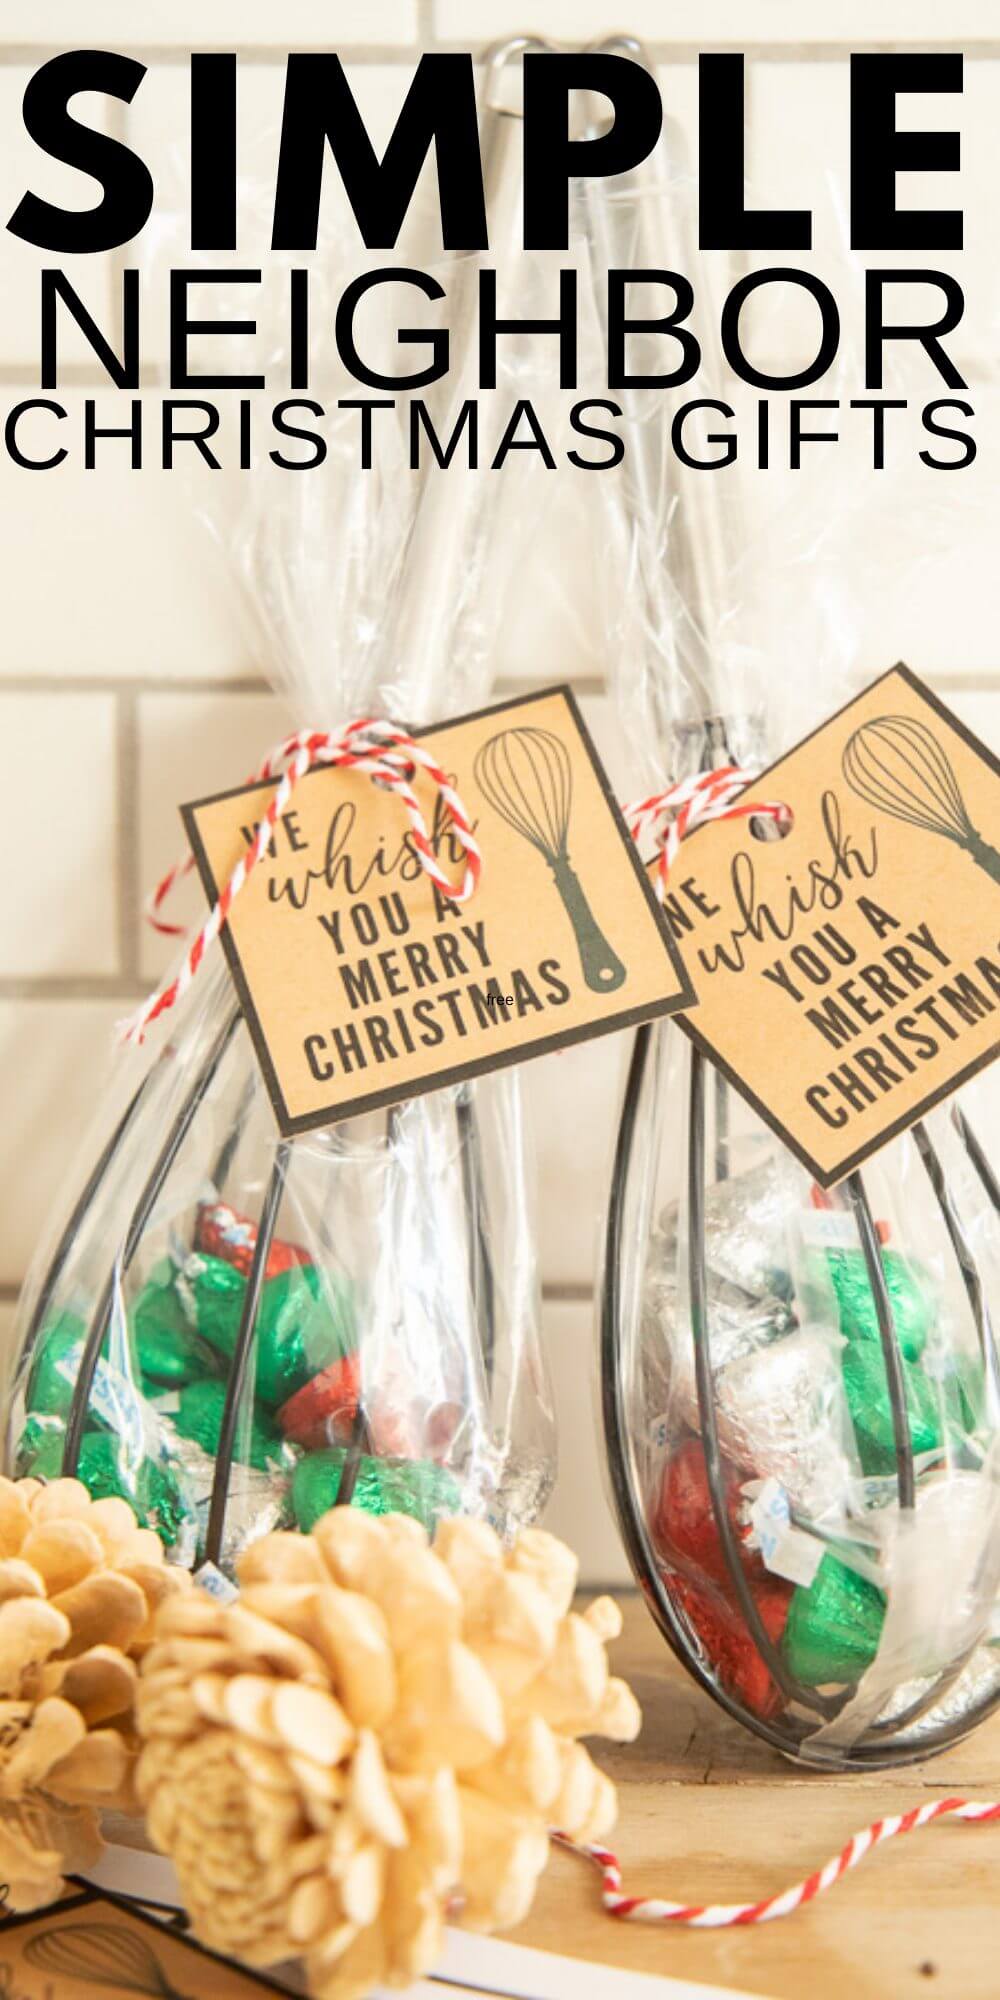 Looking for simple and adorable neighbor Christmas gift ideas?  Check these out right here. So many great ideas, and inexpensive too!  Plus, get these free printable gift tags to go with your neighbor gift!